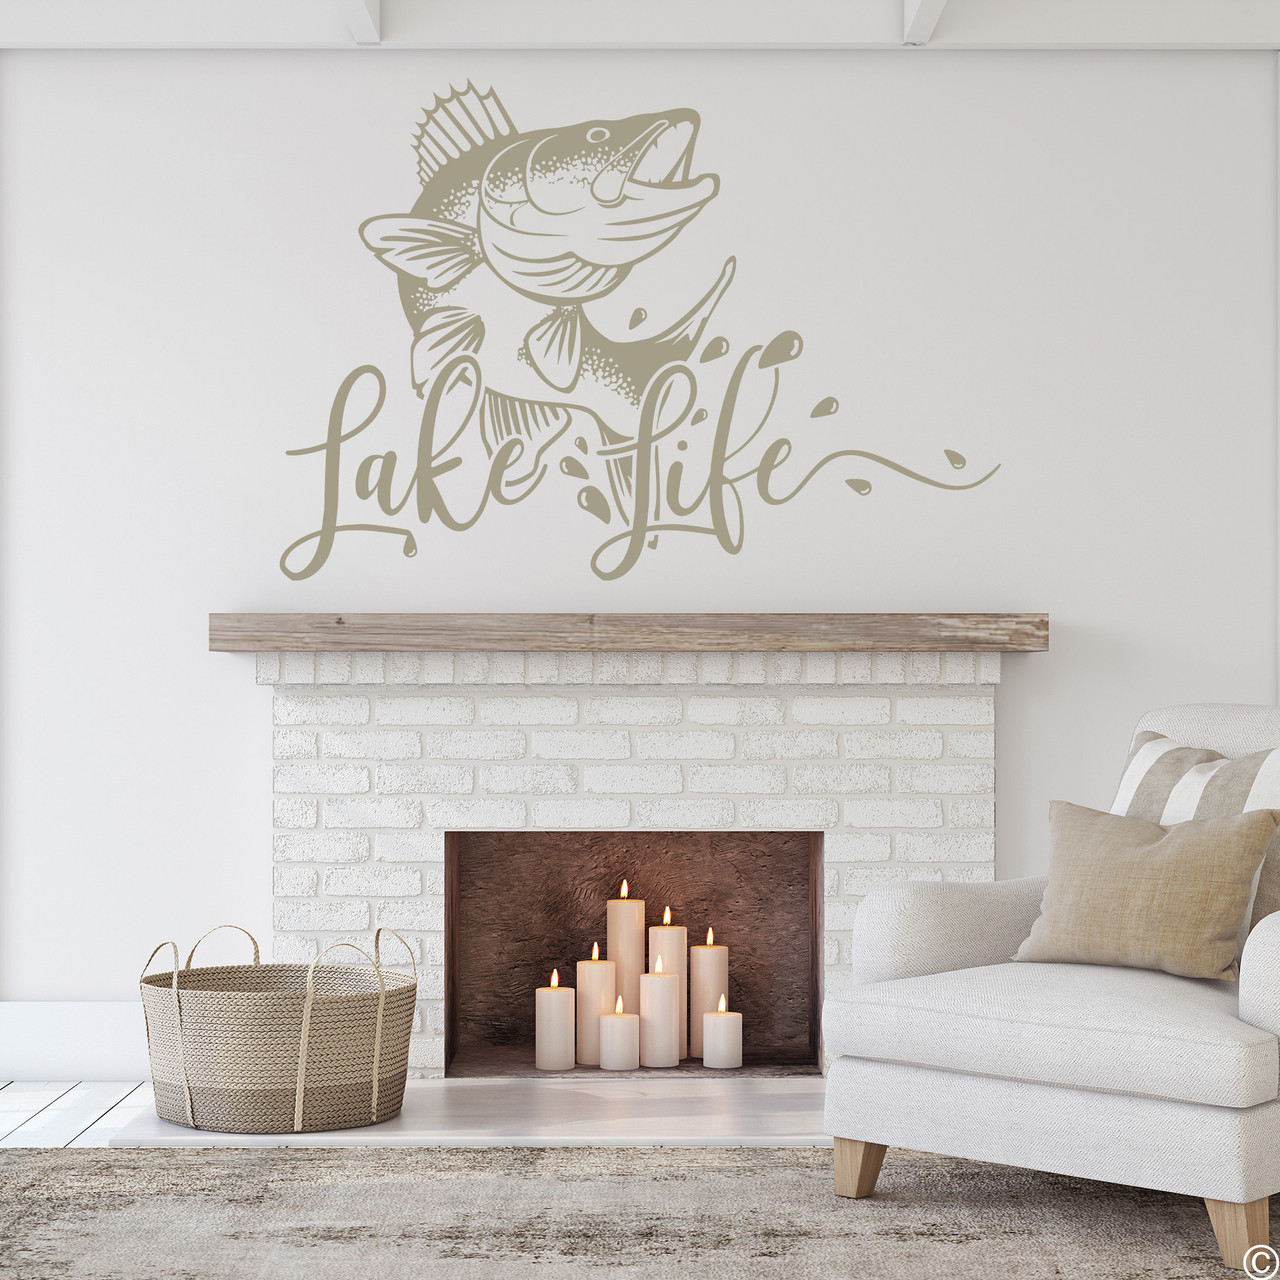 The Lake Life with walleye fish wall decal, shown here in limited edition tumbleweed vinyl color.